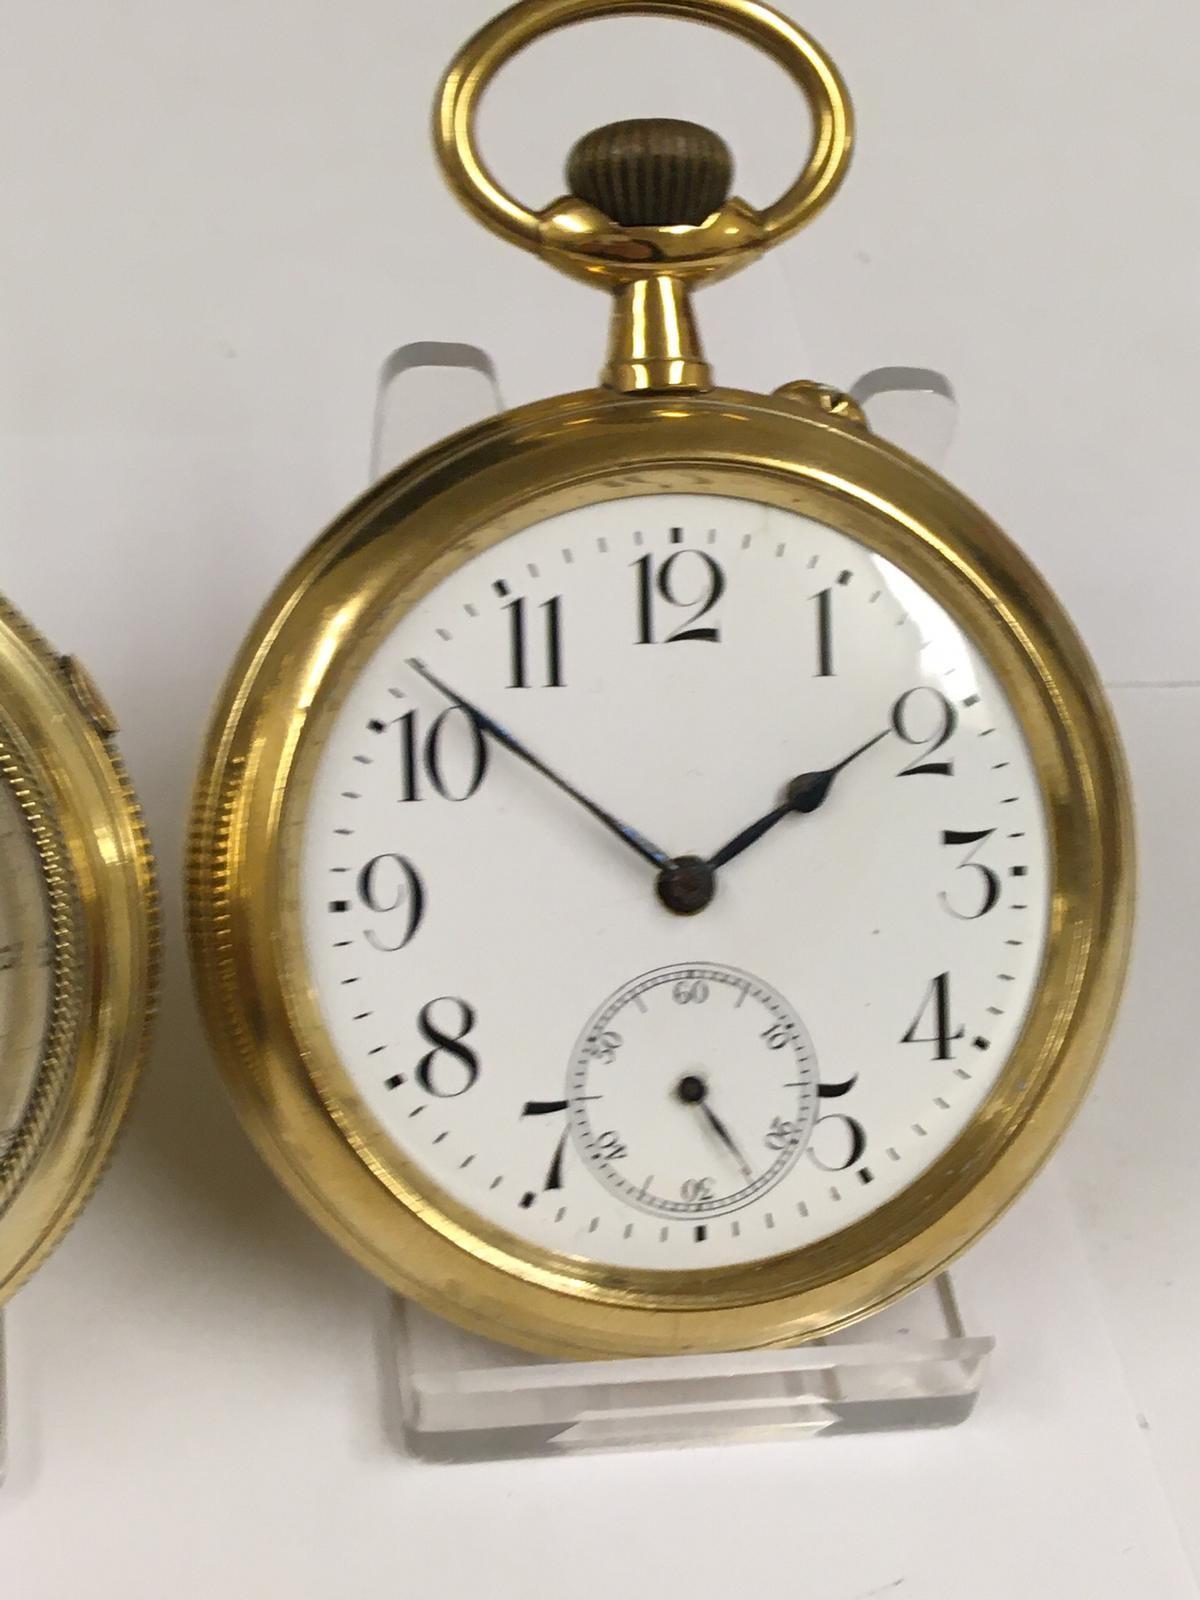 Antique Goliath pocket watch and very large antique Chronograph pocket watch (2) - Image 11 of 11